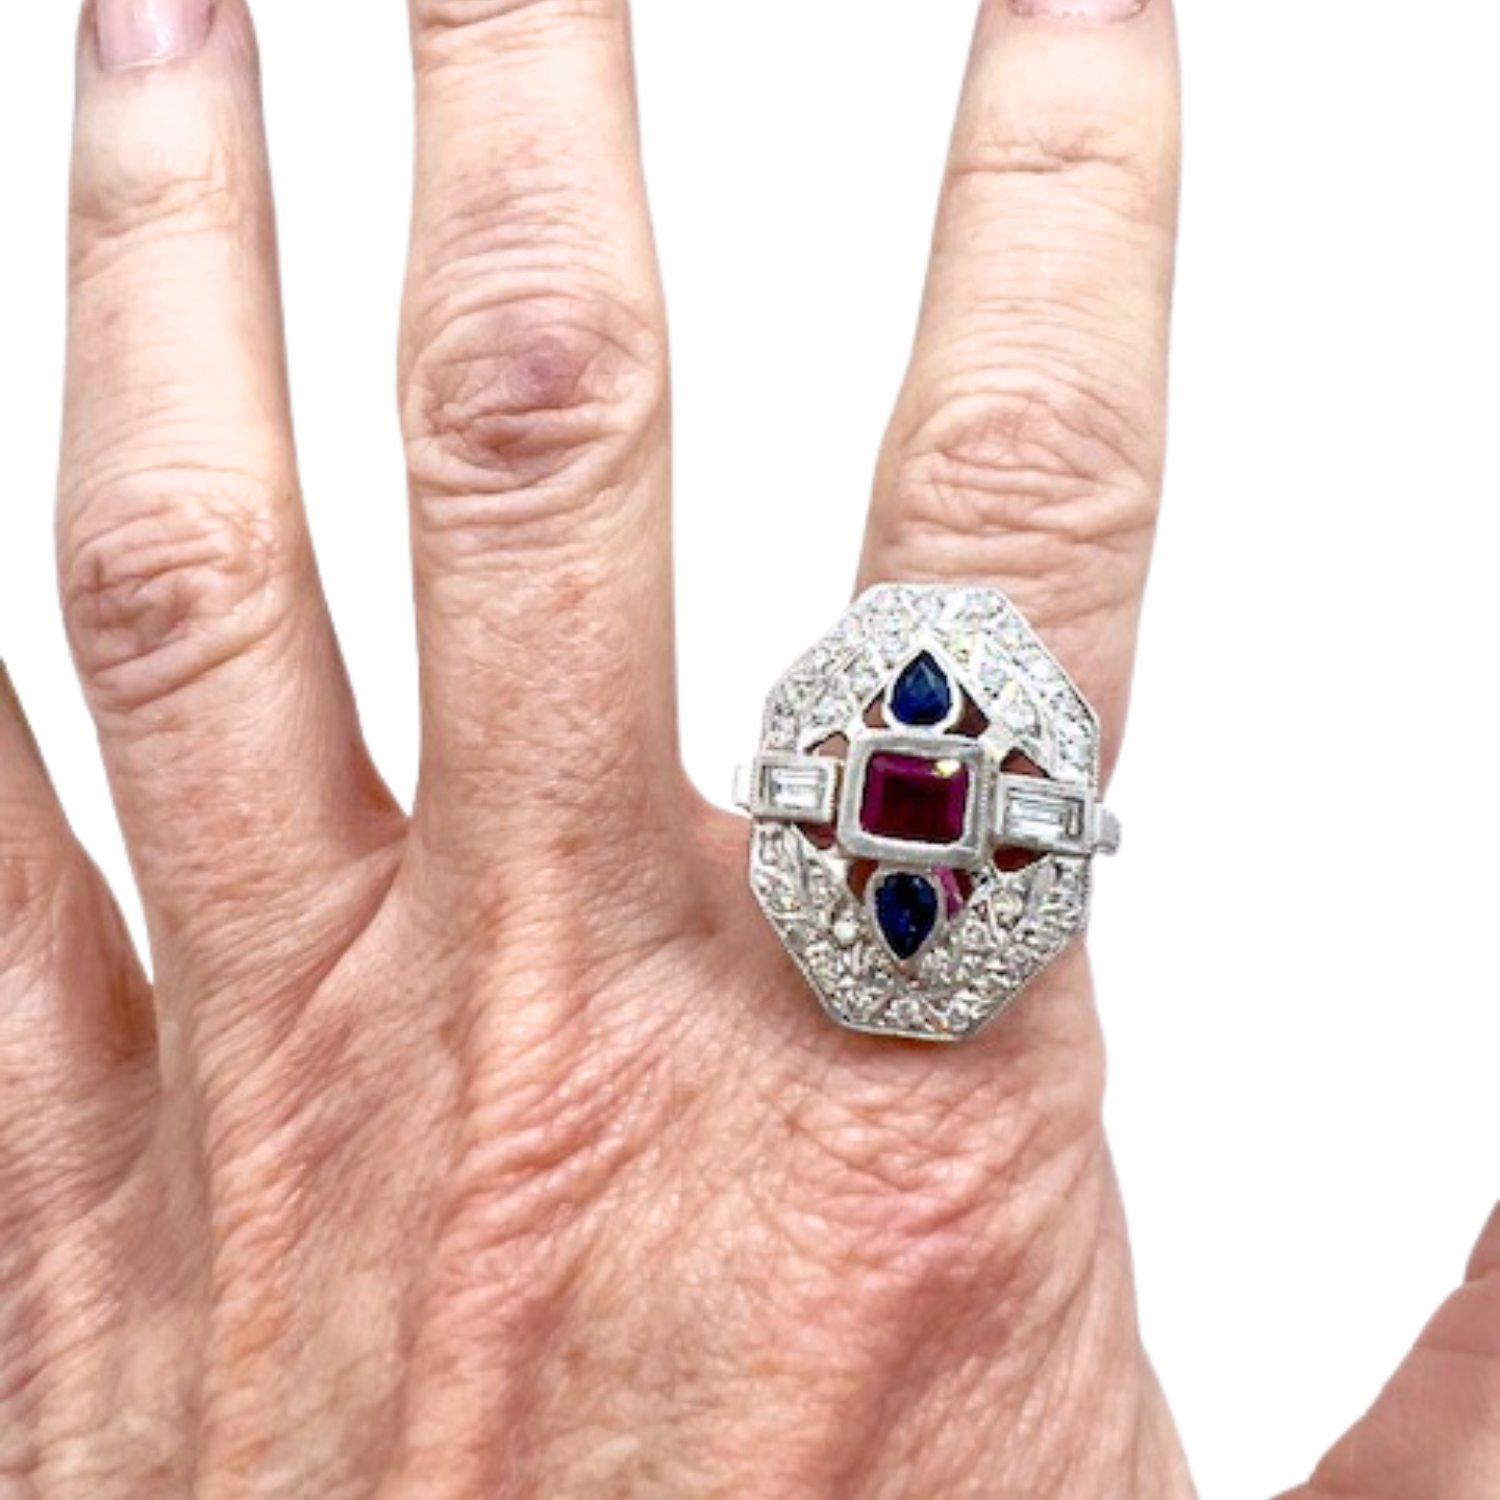 Baguette Cut Art Deco Style with Rubies and Sapphires 950 Platinum Ring For Sale